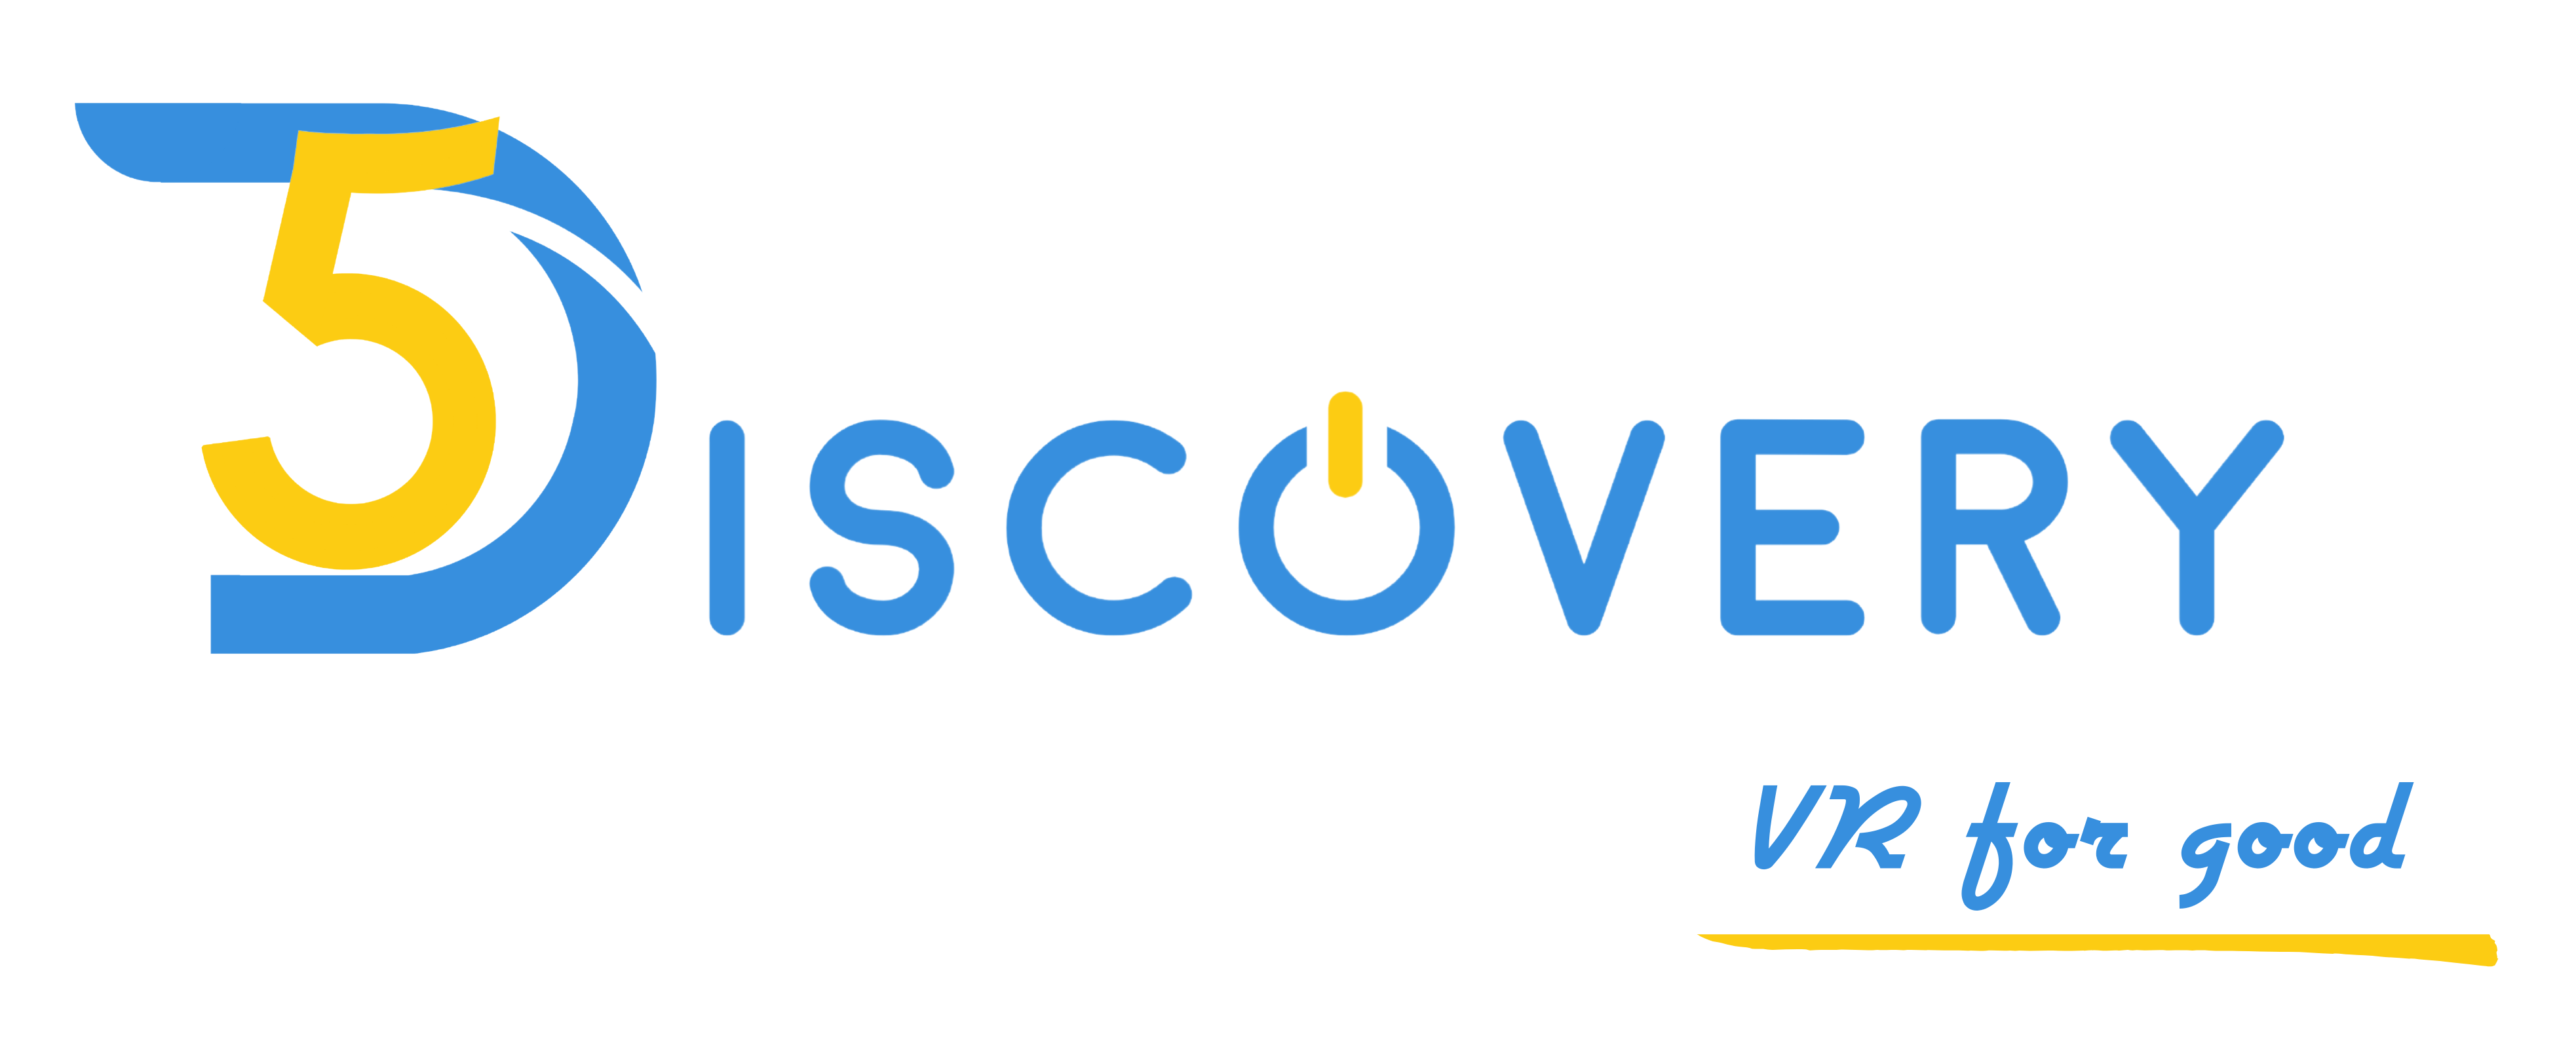 5discovery